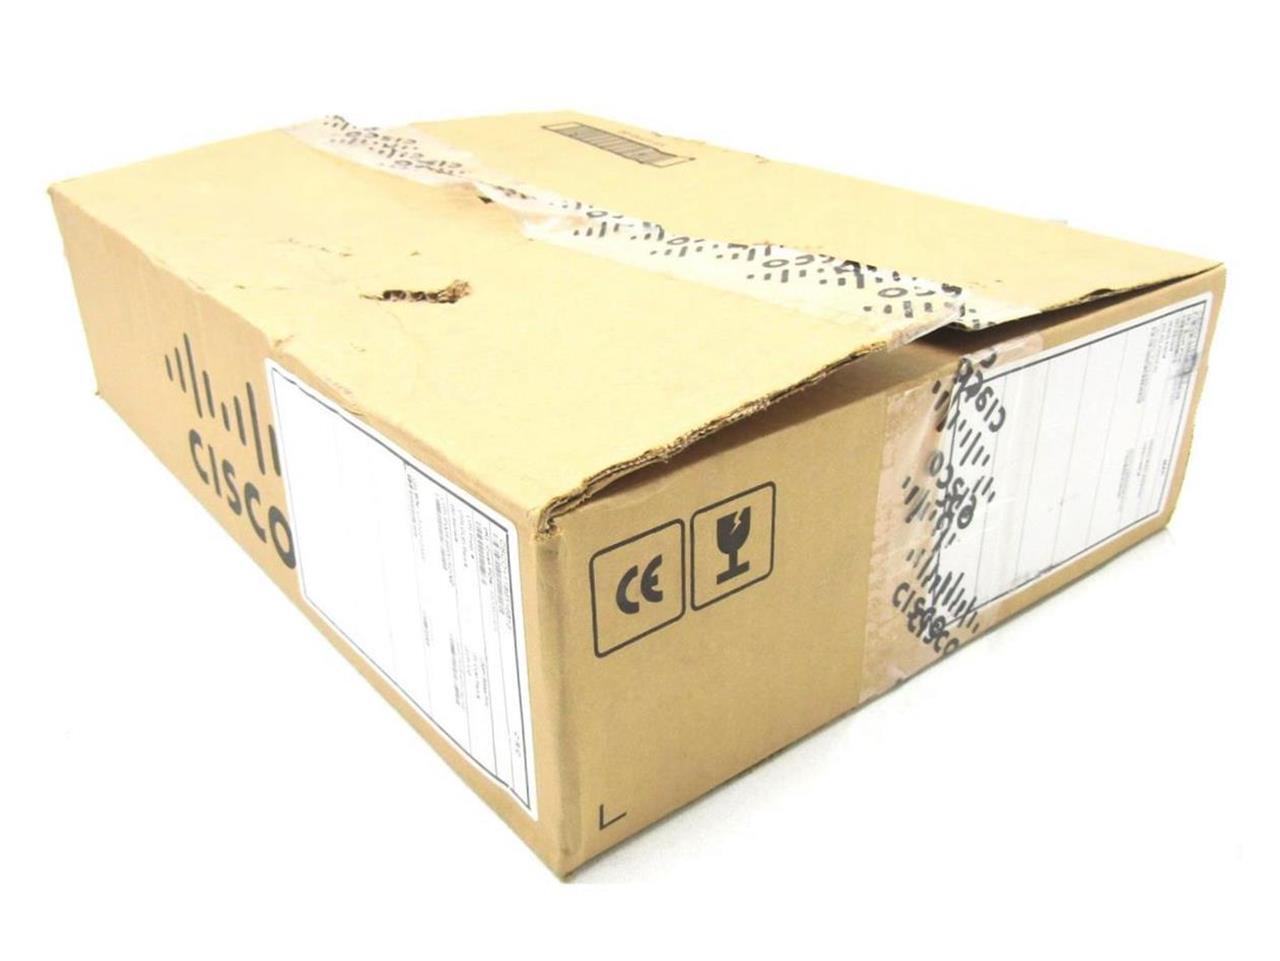 New-Open Box Cisco C892FSP-K9 V02 8-Port Integrated Service Router Switch